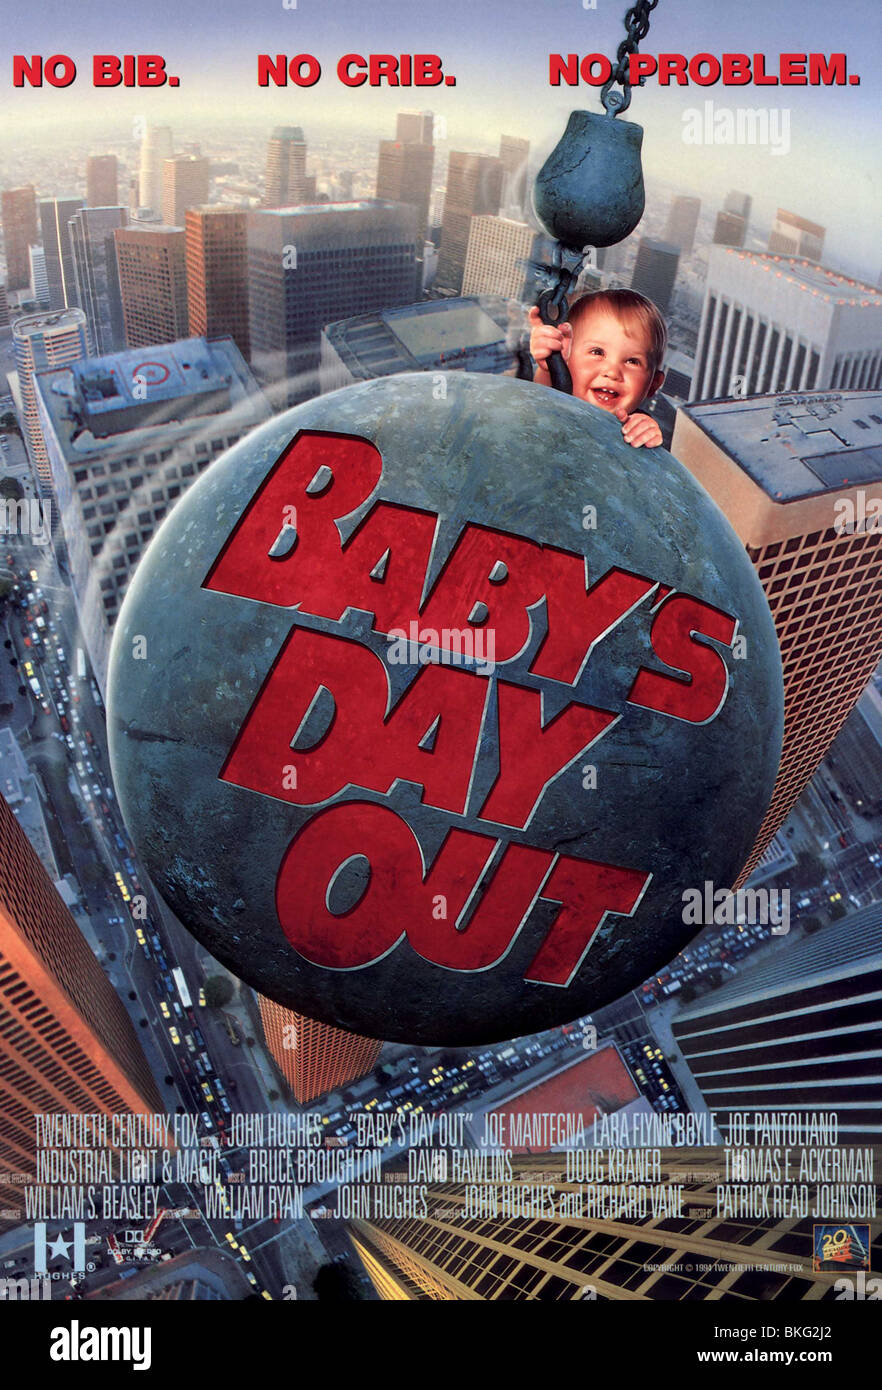 download babys day out movie